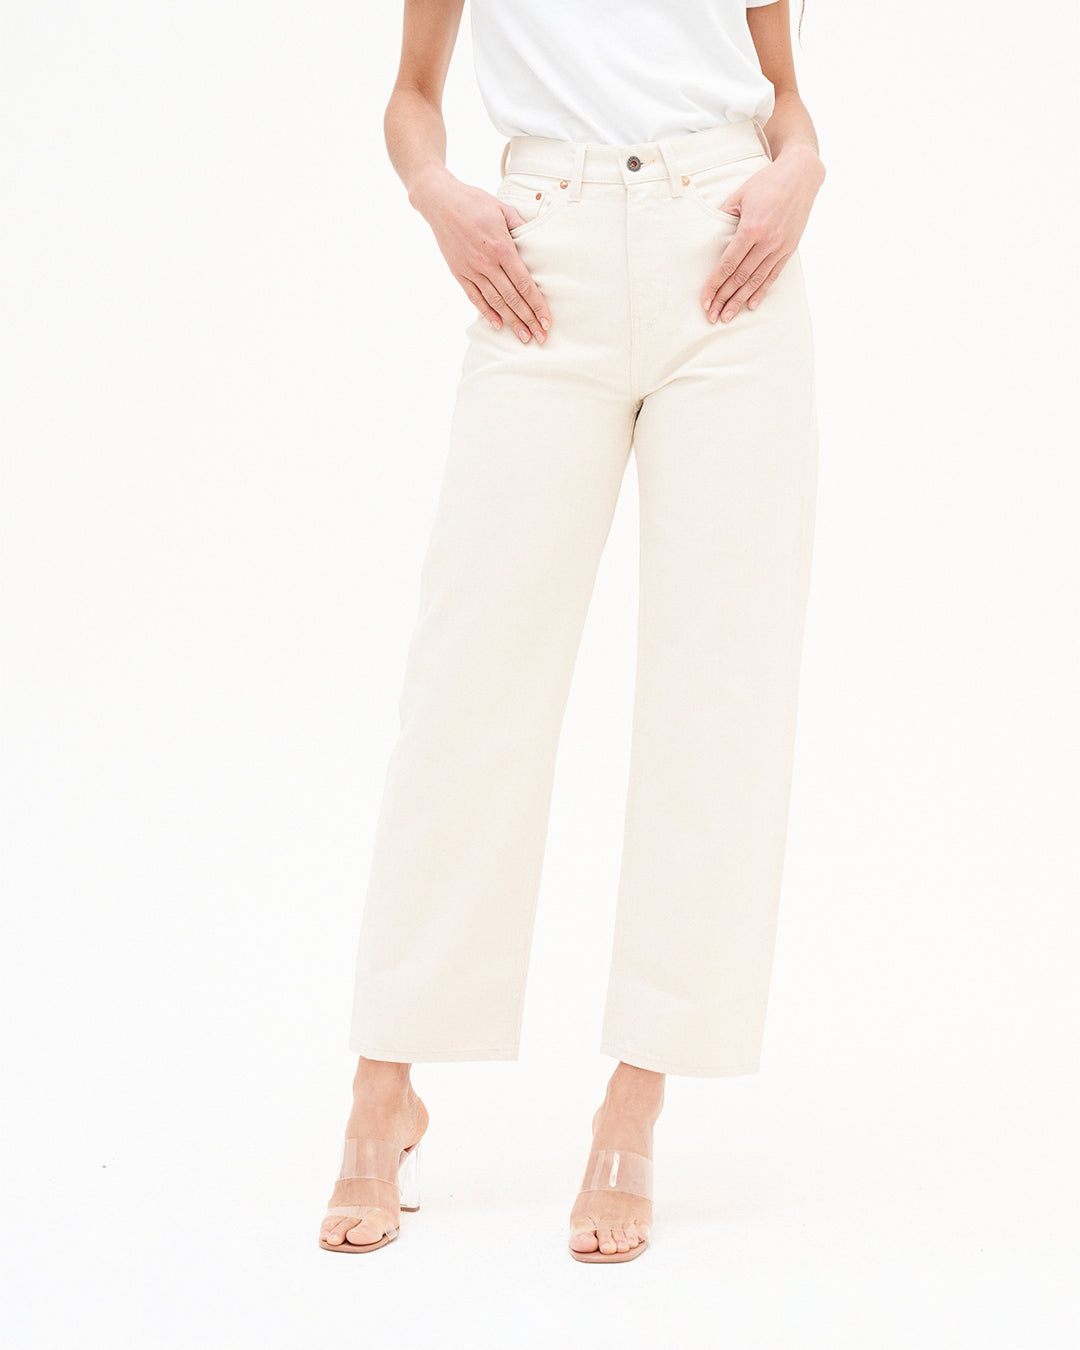 Bobbie Barrel undyed jeans made from organic cotton by Kuyichi